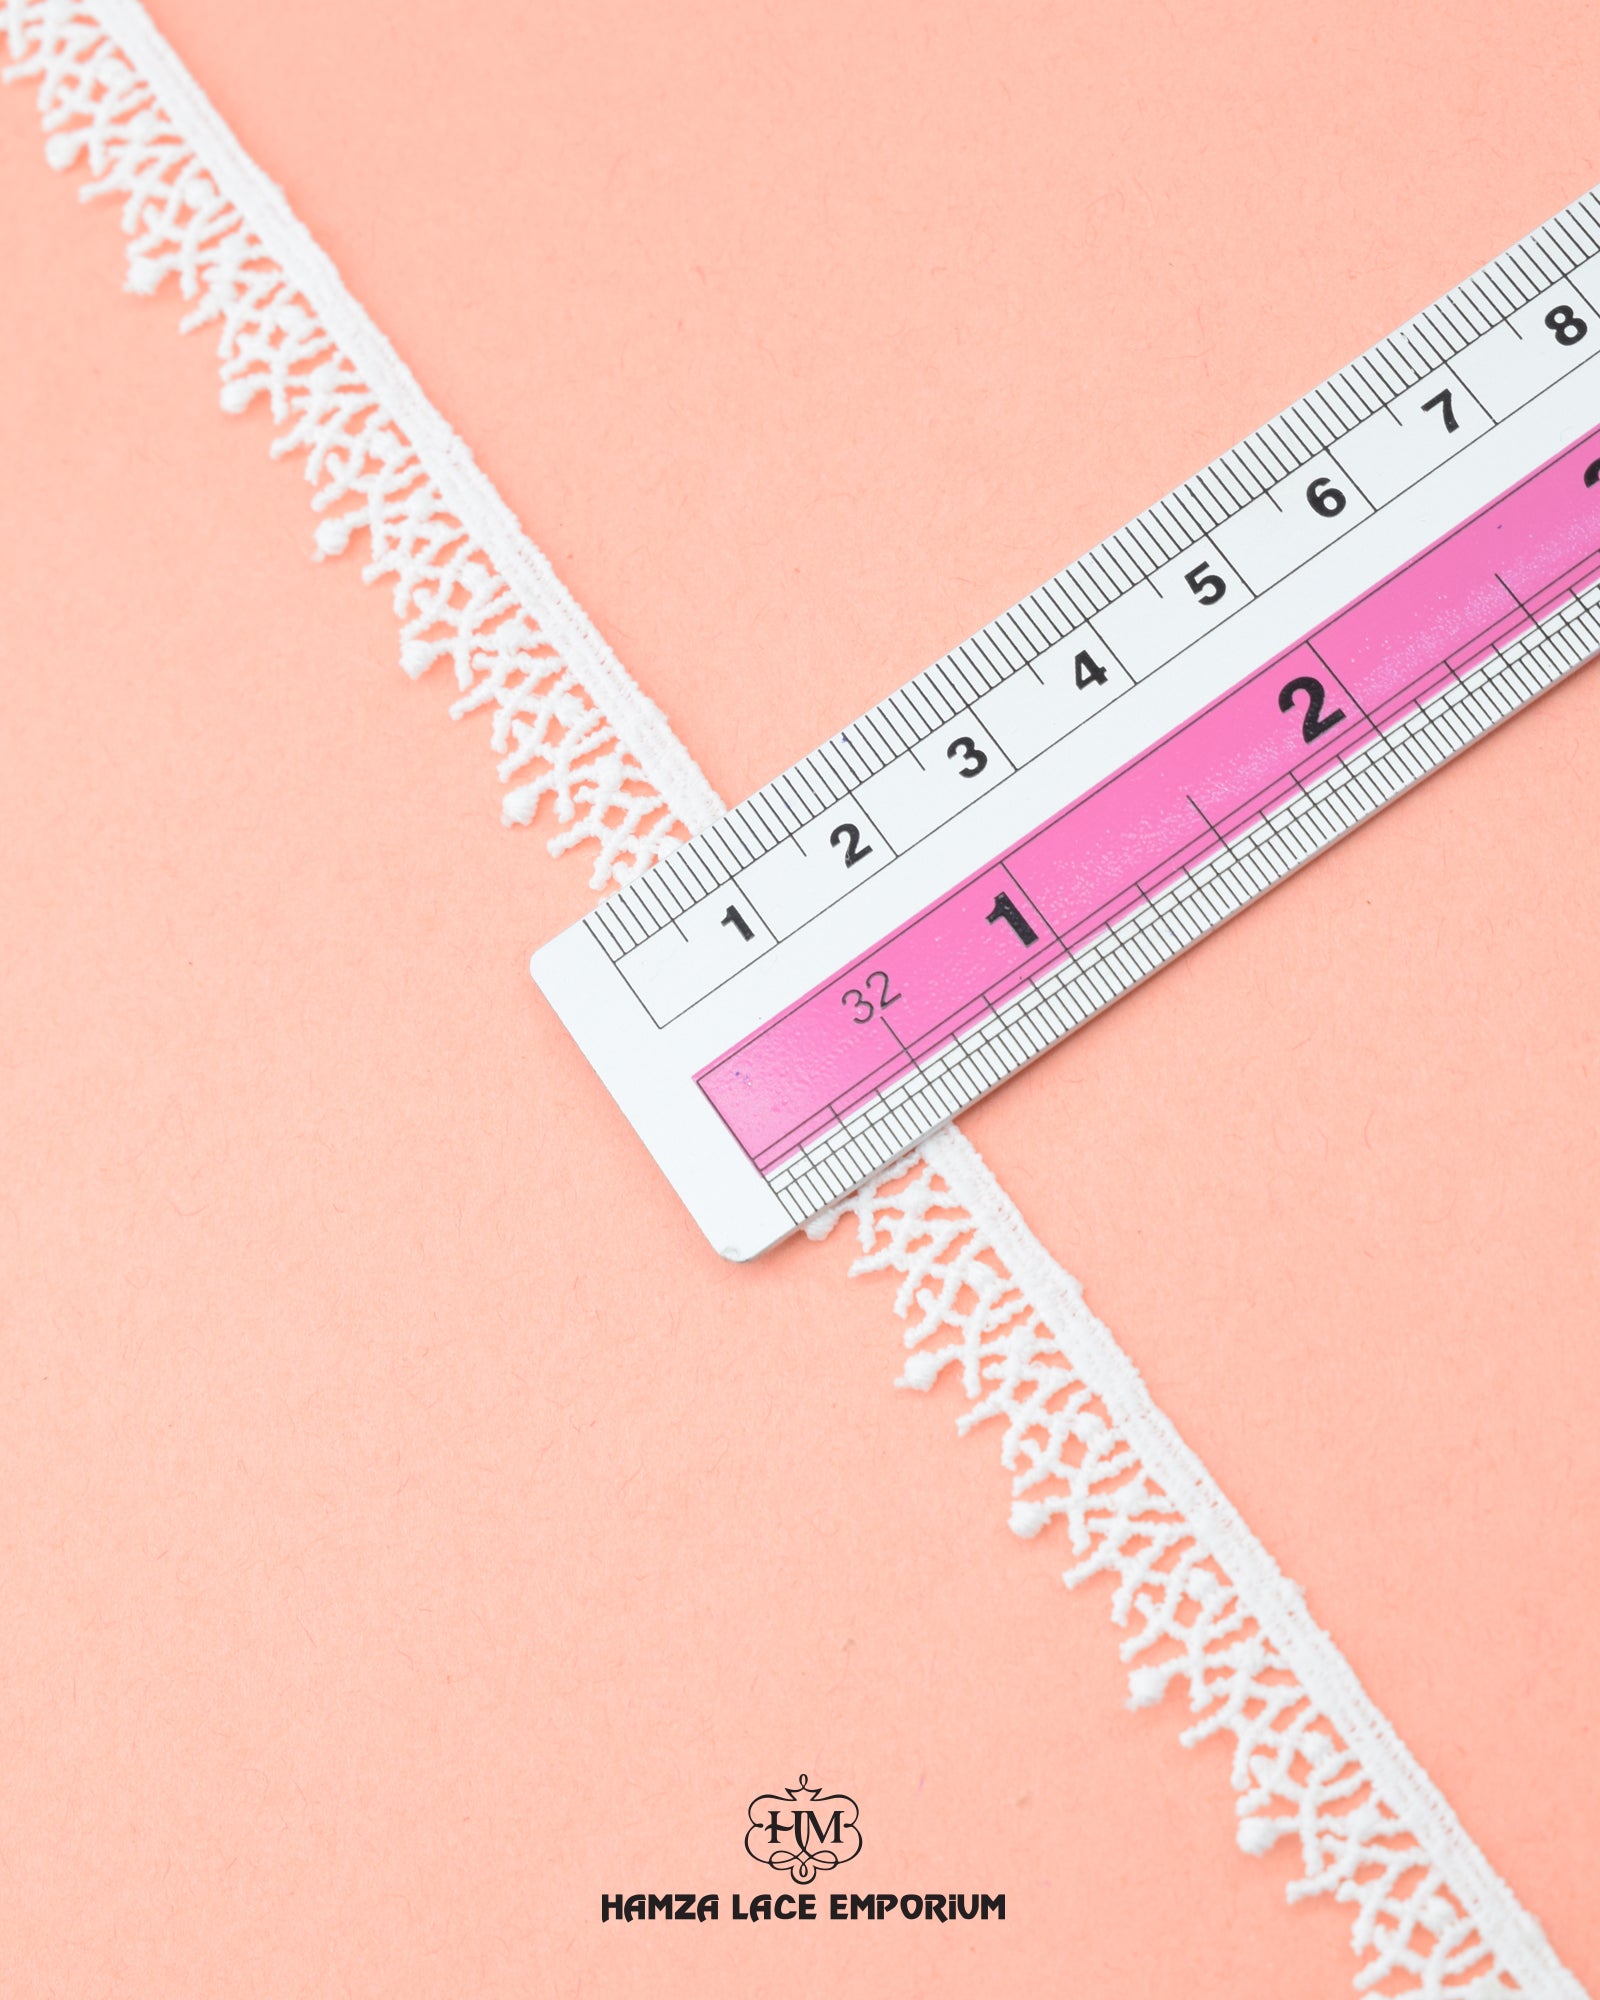 A scale is placed on the 'Edging Lace 5286' for the purpose to show its size that is 0.5 inches